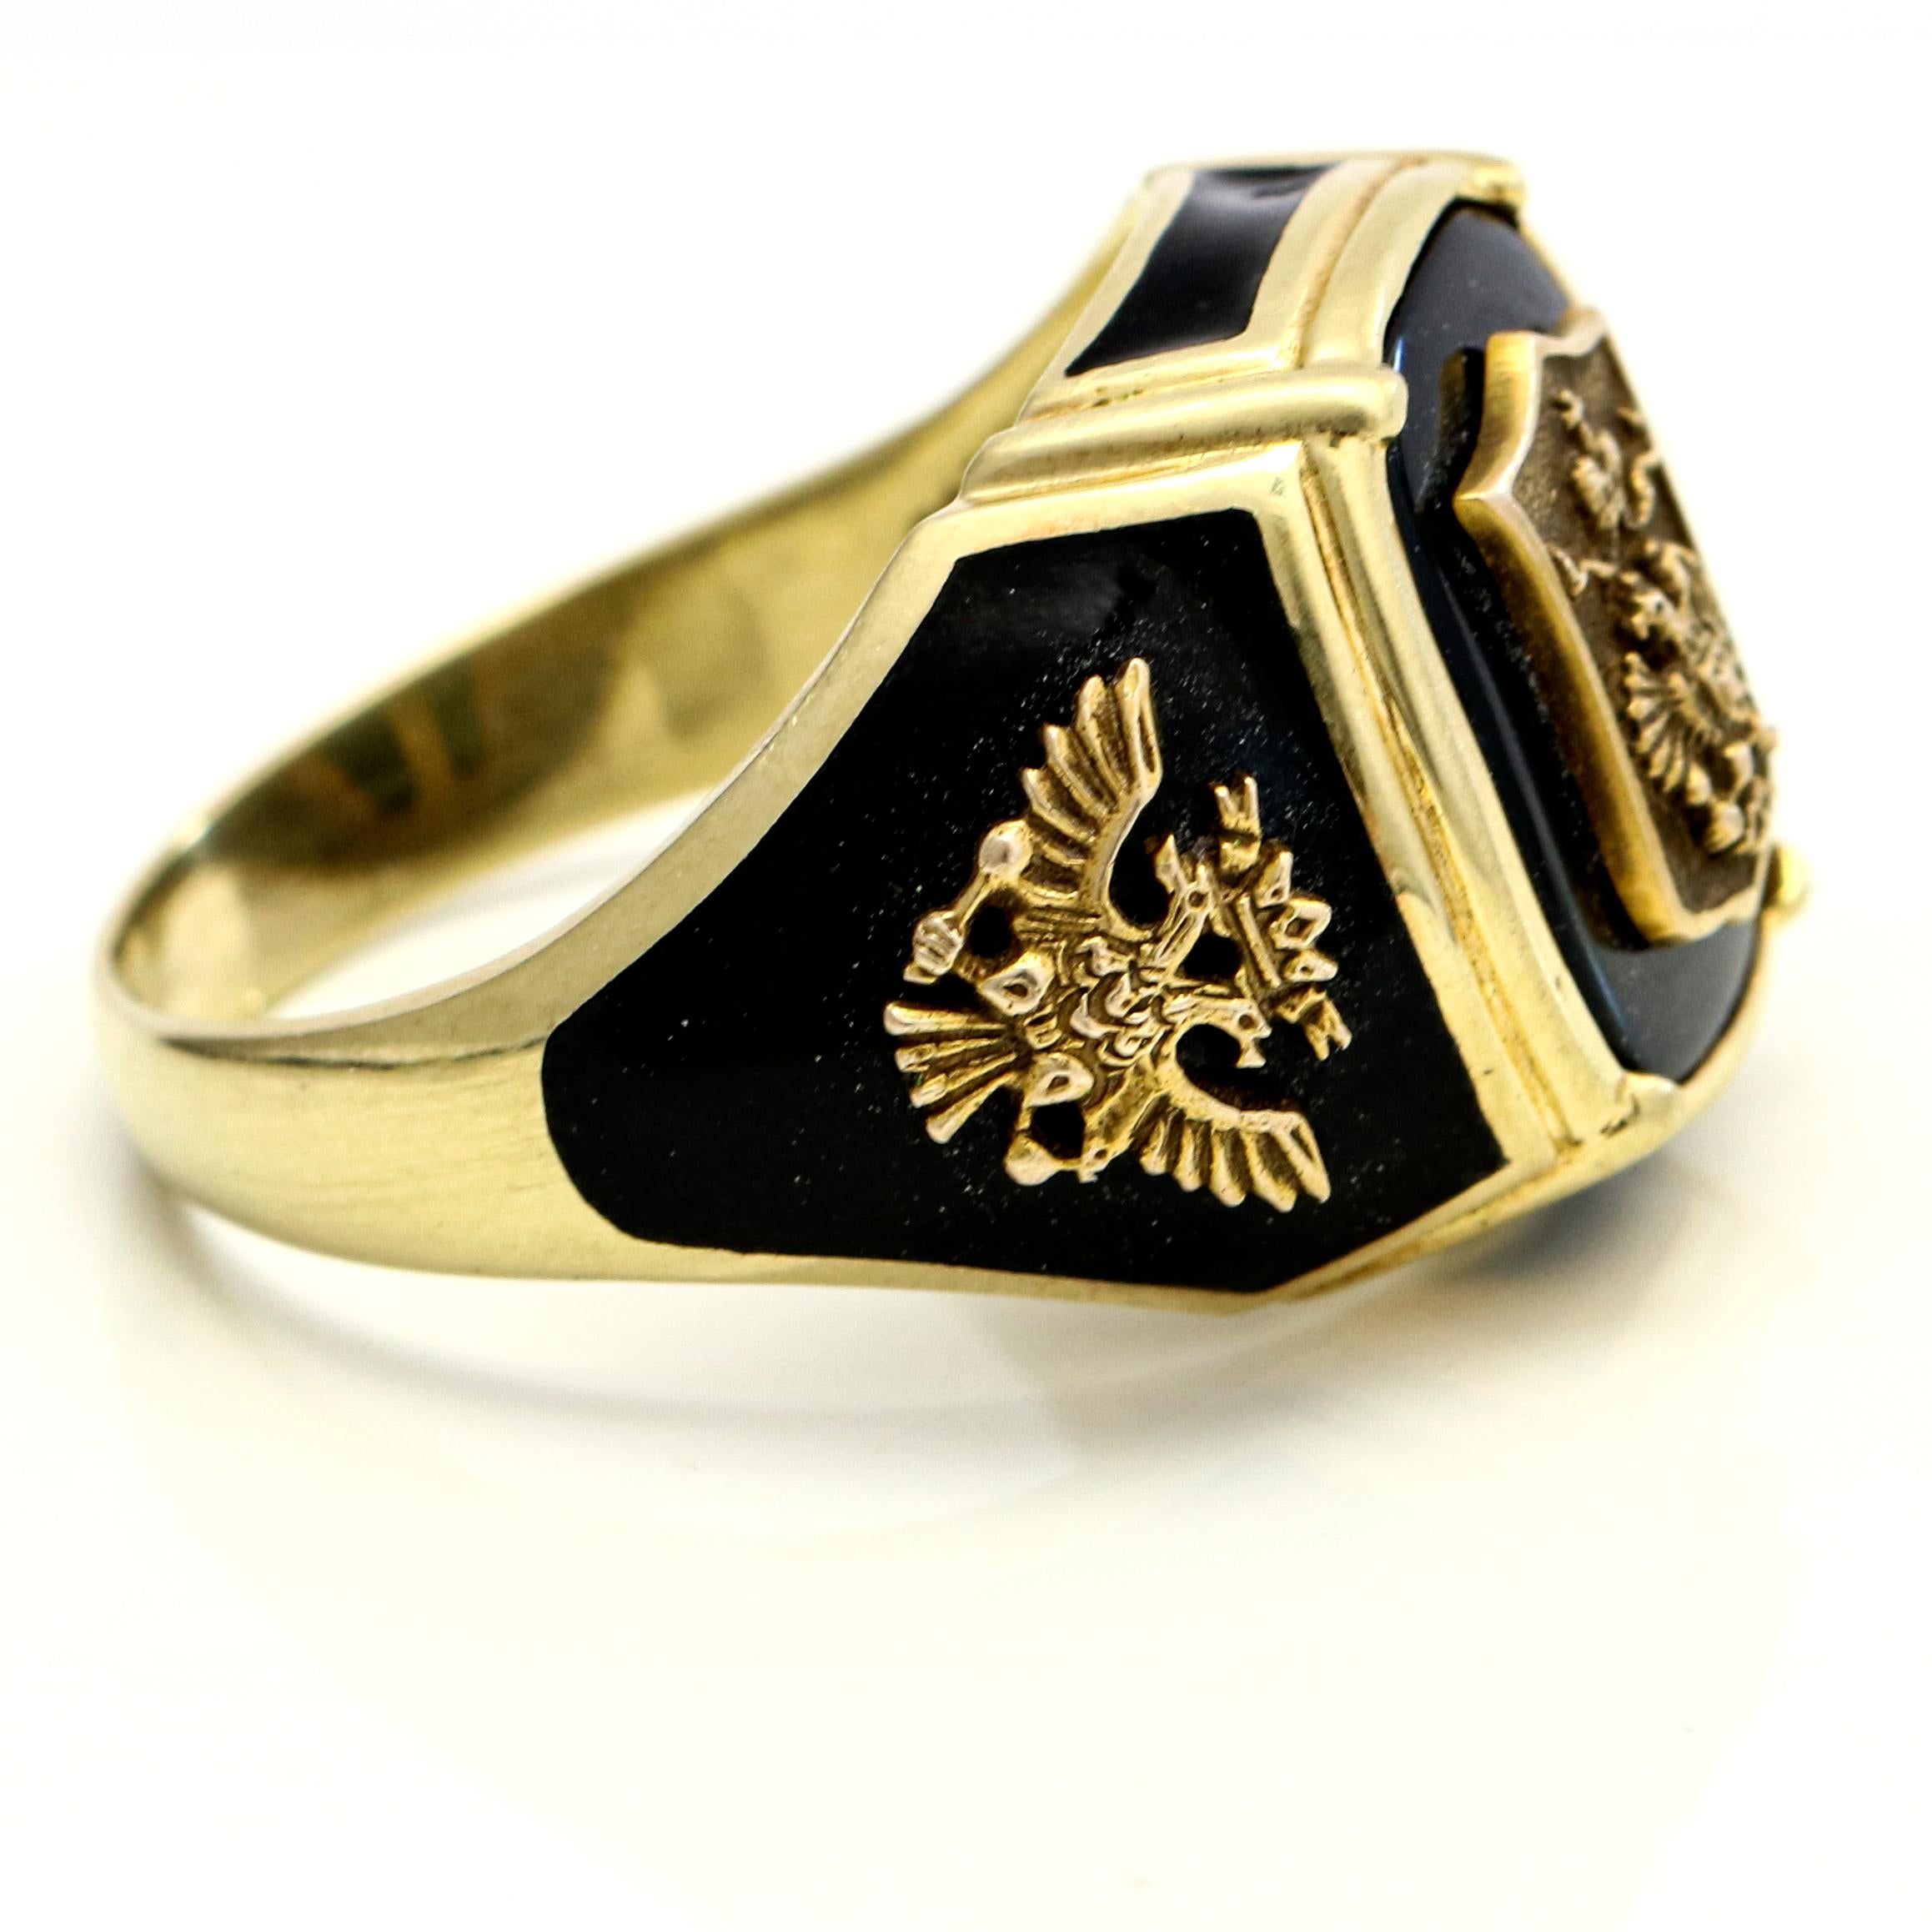 14 Karat Yellow Gold Black Onyx Enamel Imperial Eagle Men's Ring In Good Condition For Sale In Fort Lauderdale, FL